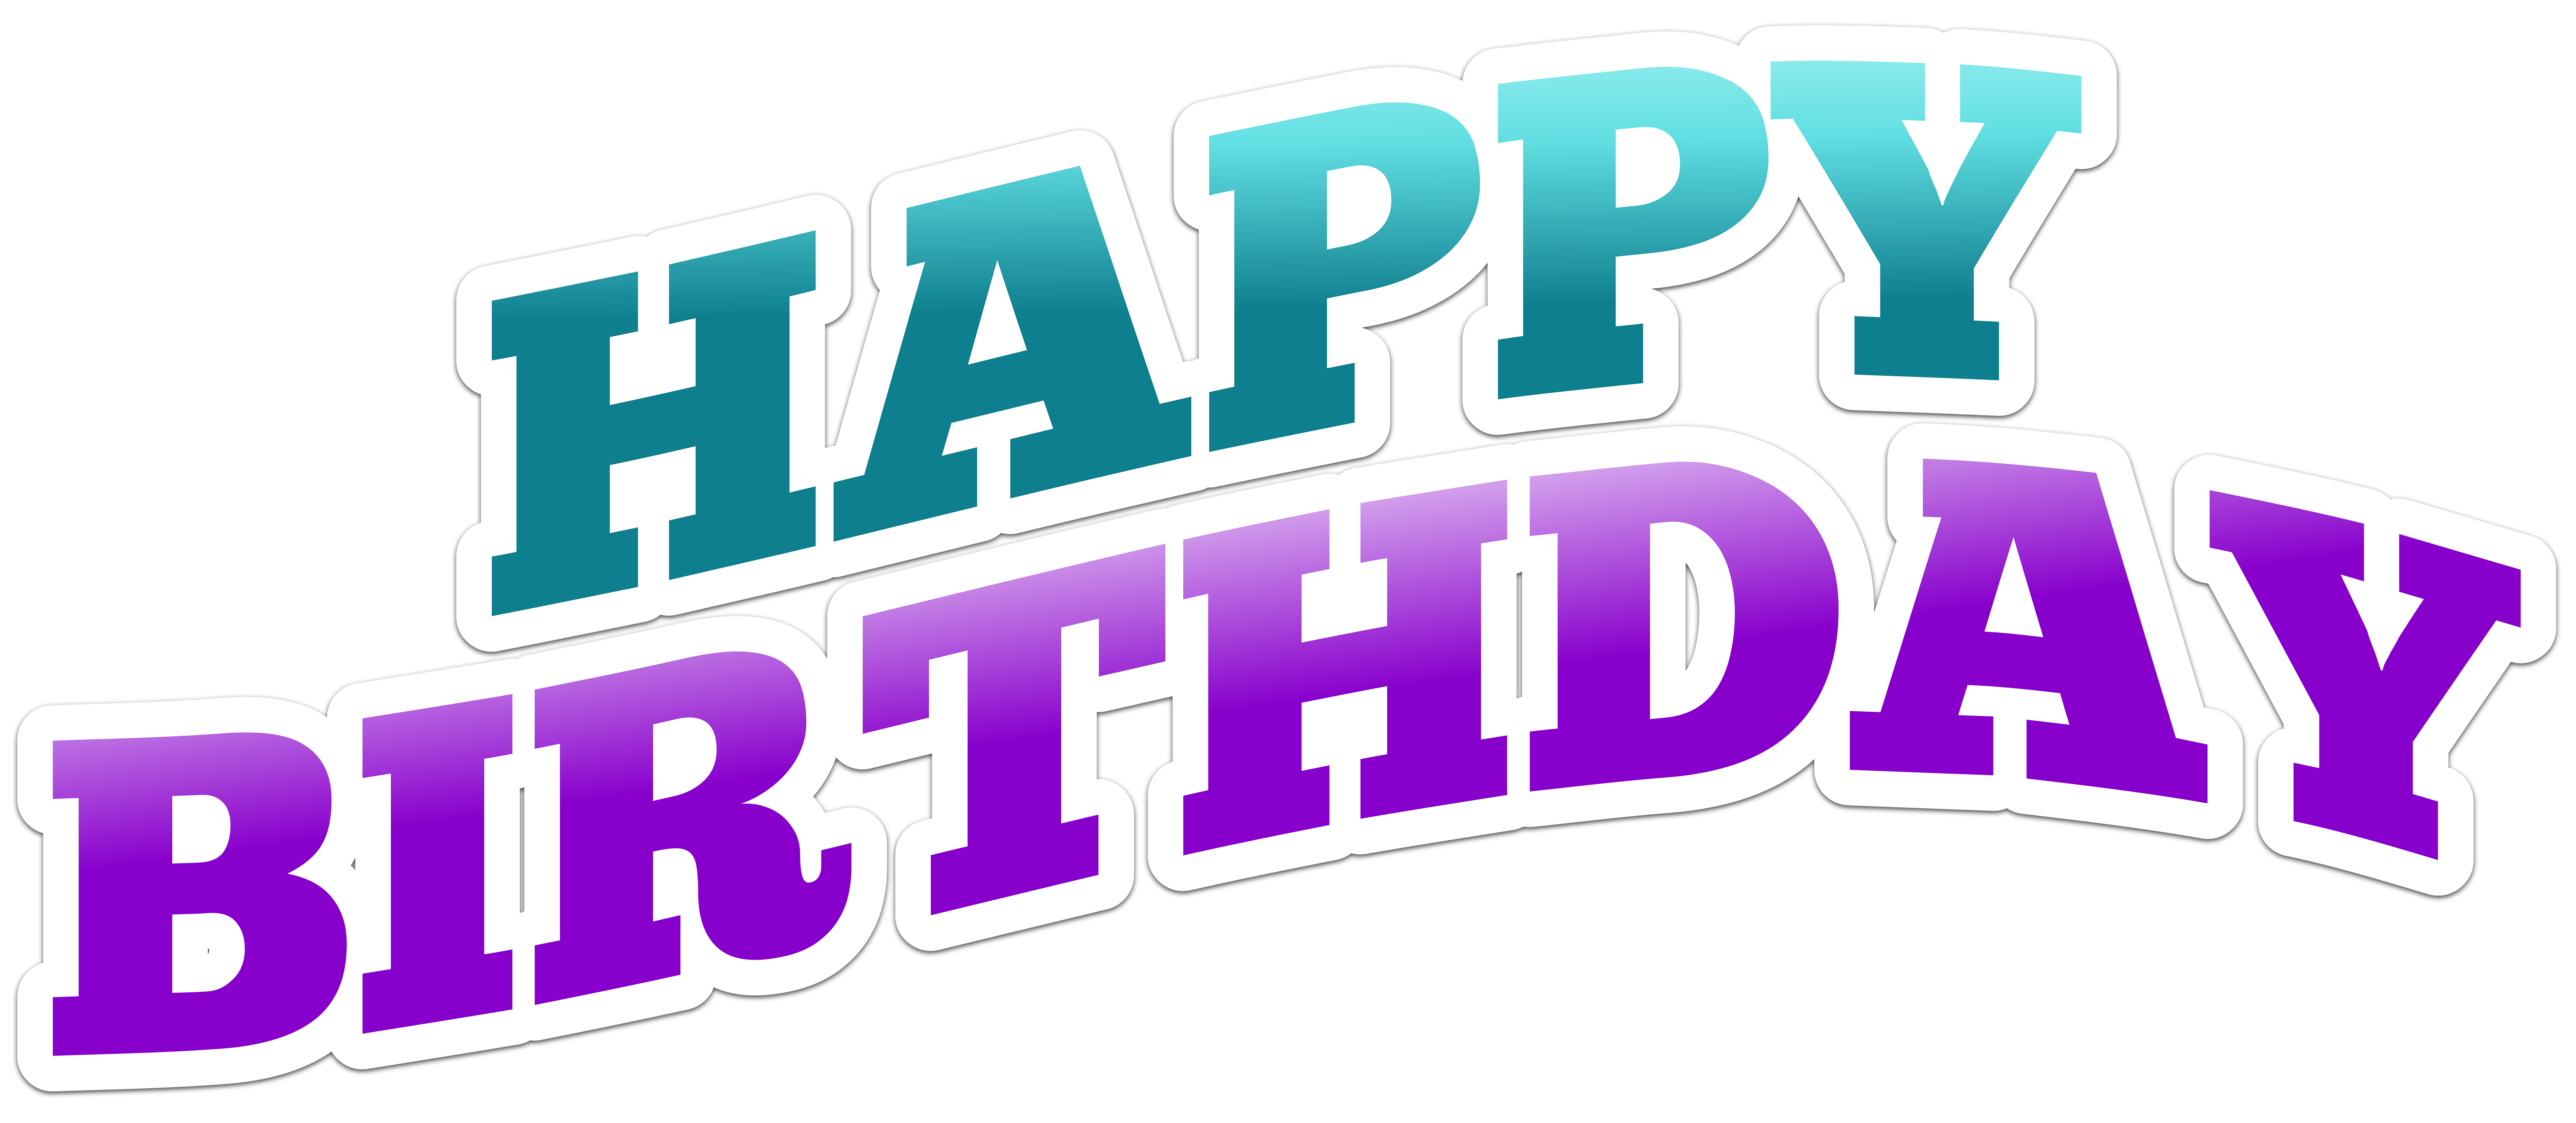 Happy Birthday Png Text Clip Art Image Gallery Yopriceville High Quality Images And Transparent Png Free Clipart